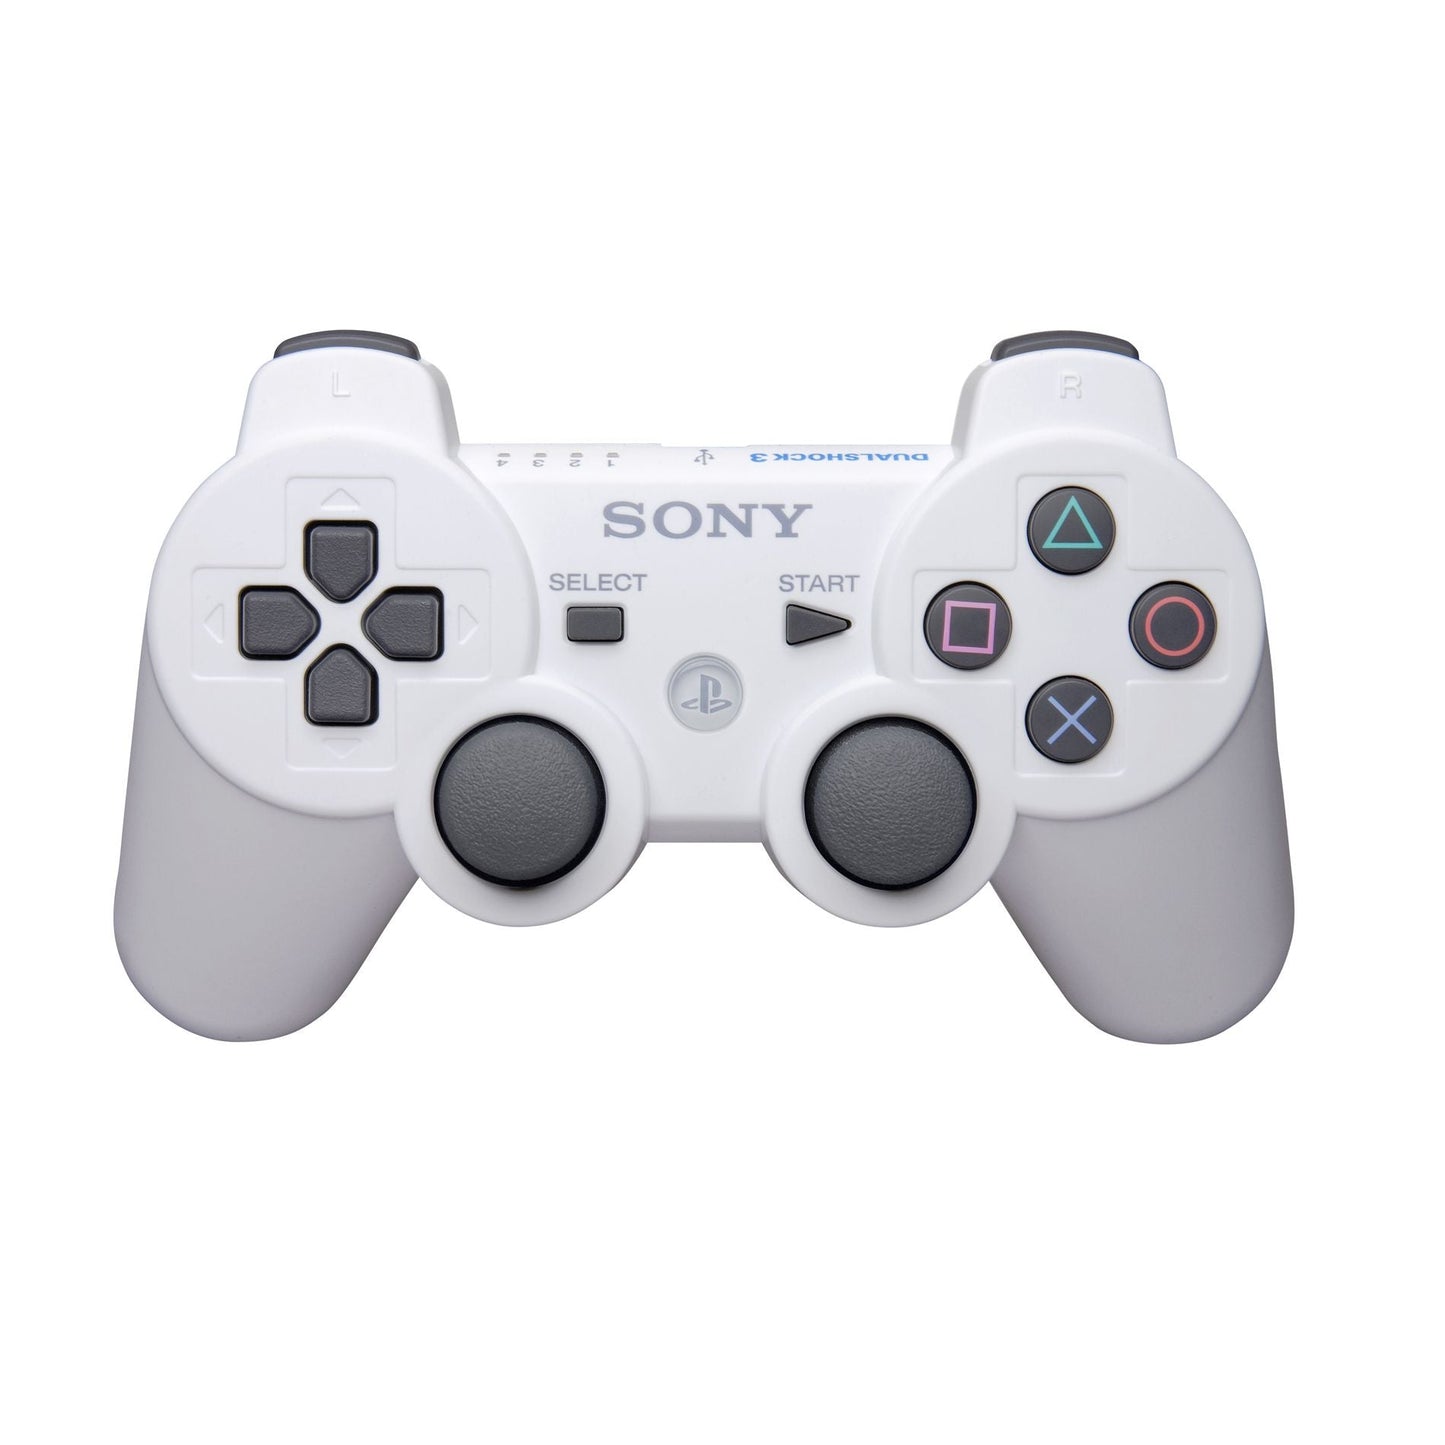 SONY Playstation 3 PS3 Dualshock Wireless Controller OEM, White from 2P Gaming